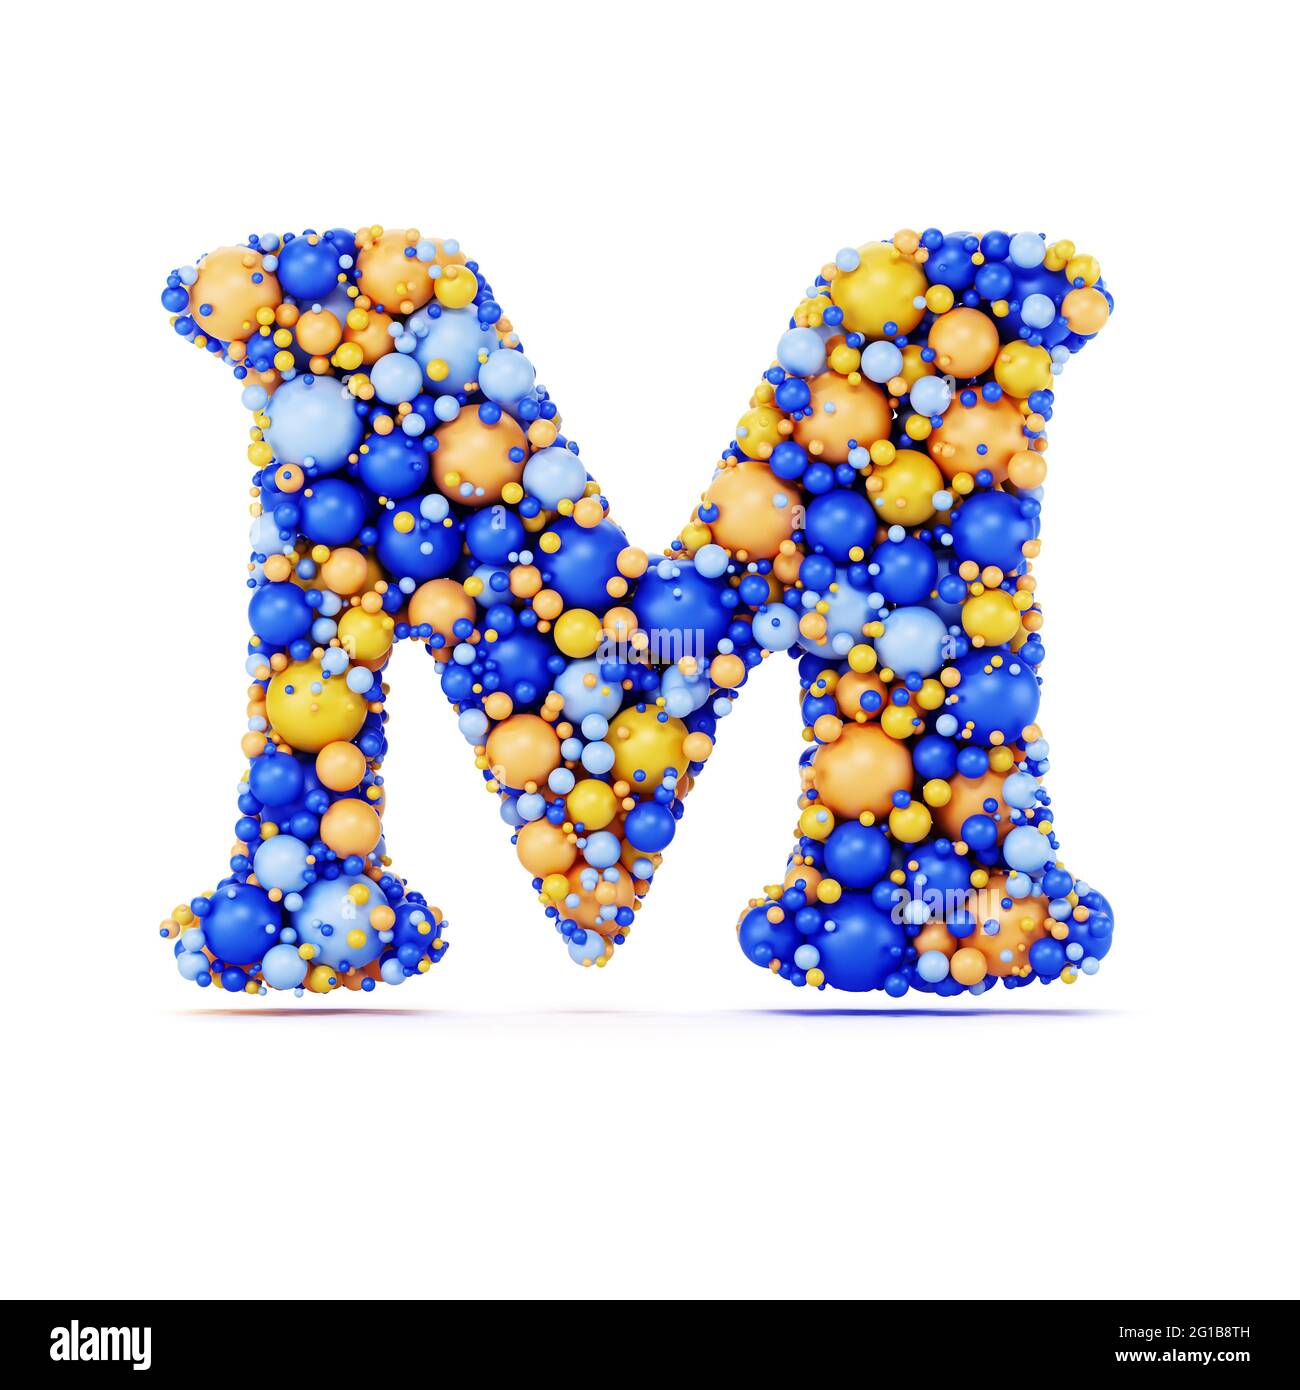 M letter with colored shiny balls. Realistic 3d rendering illustration. Isolated on white background with shadow cast Stock Photo